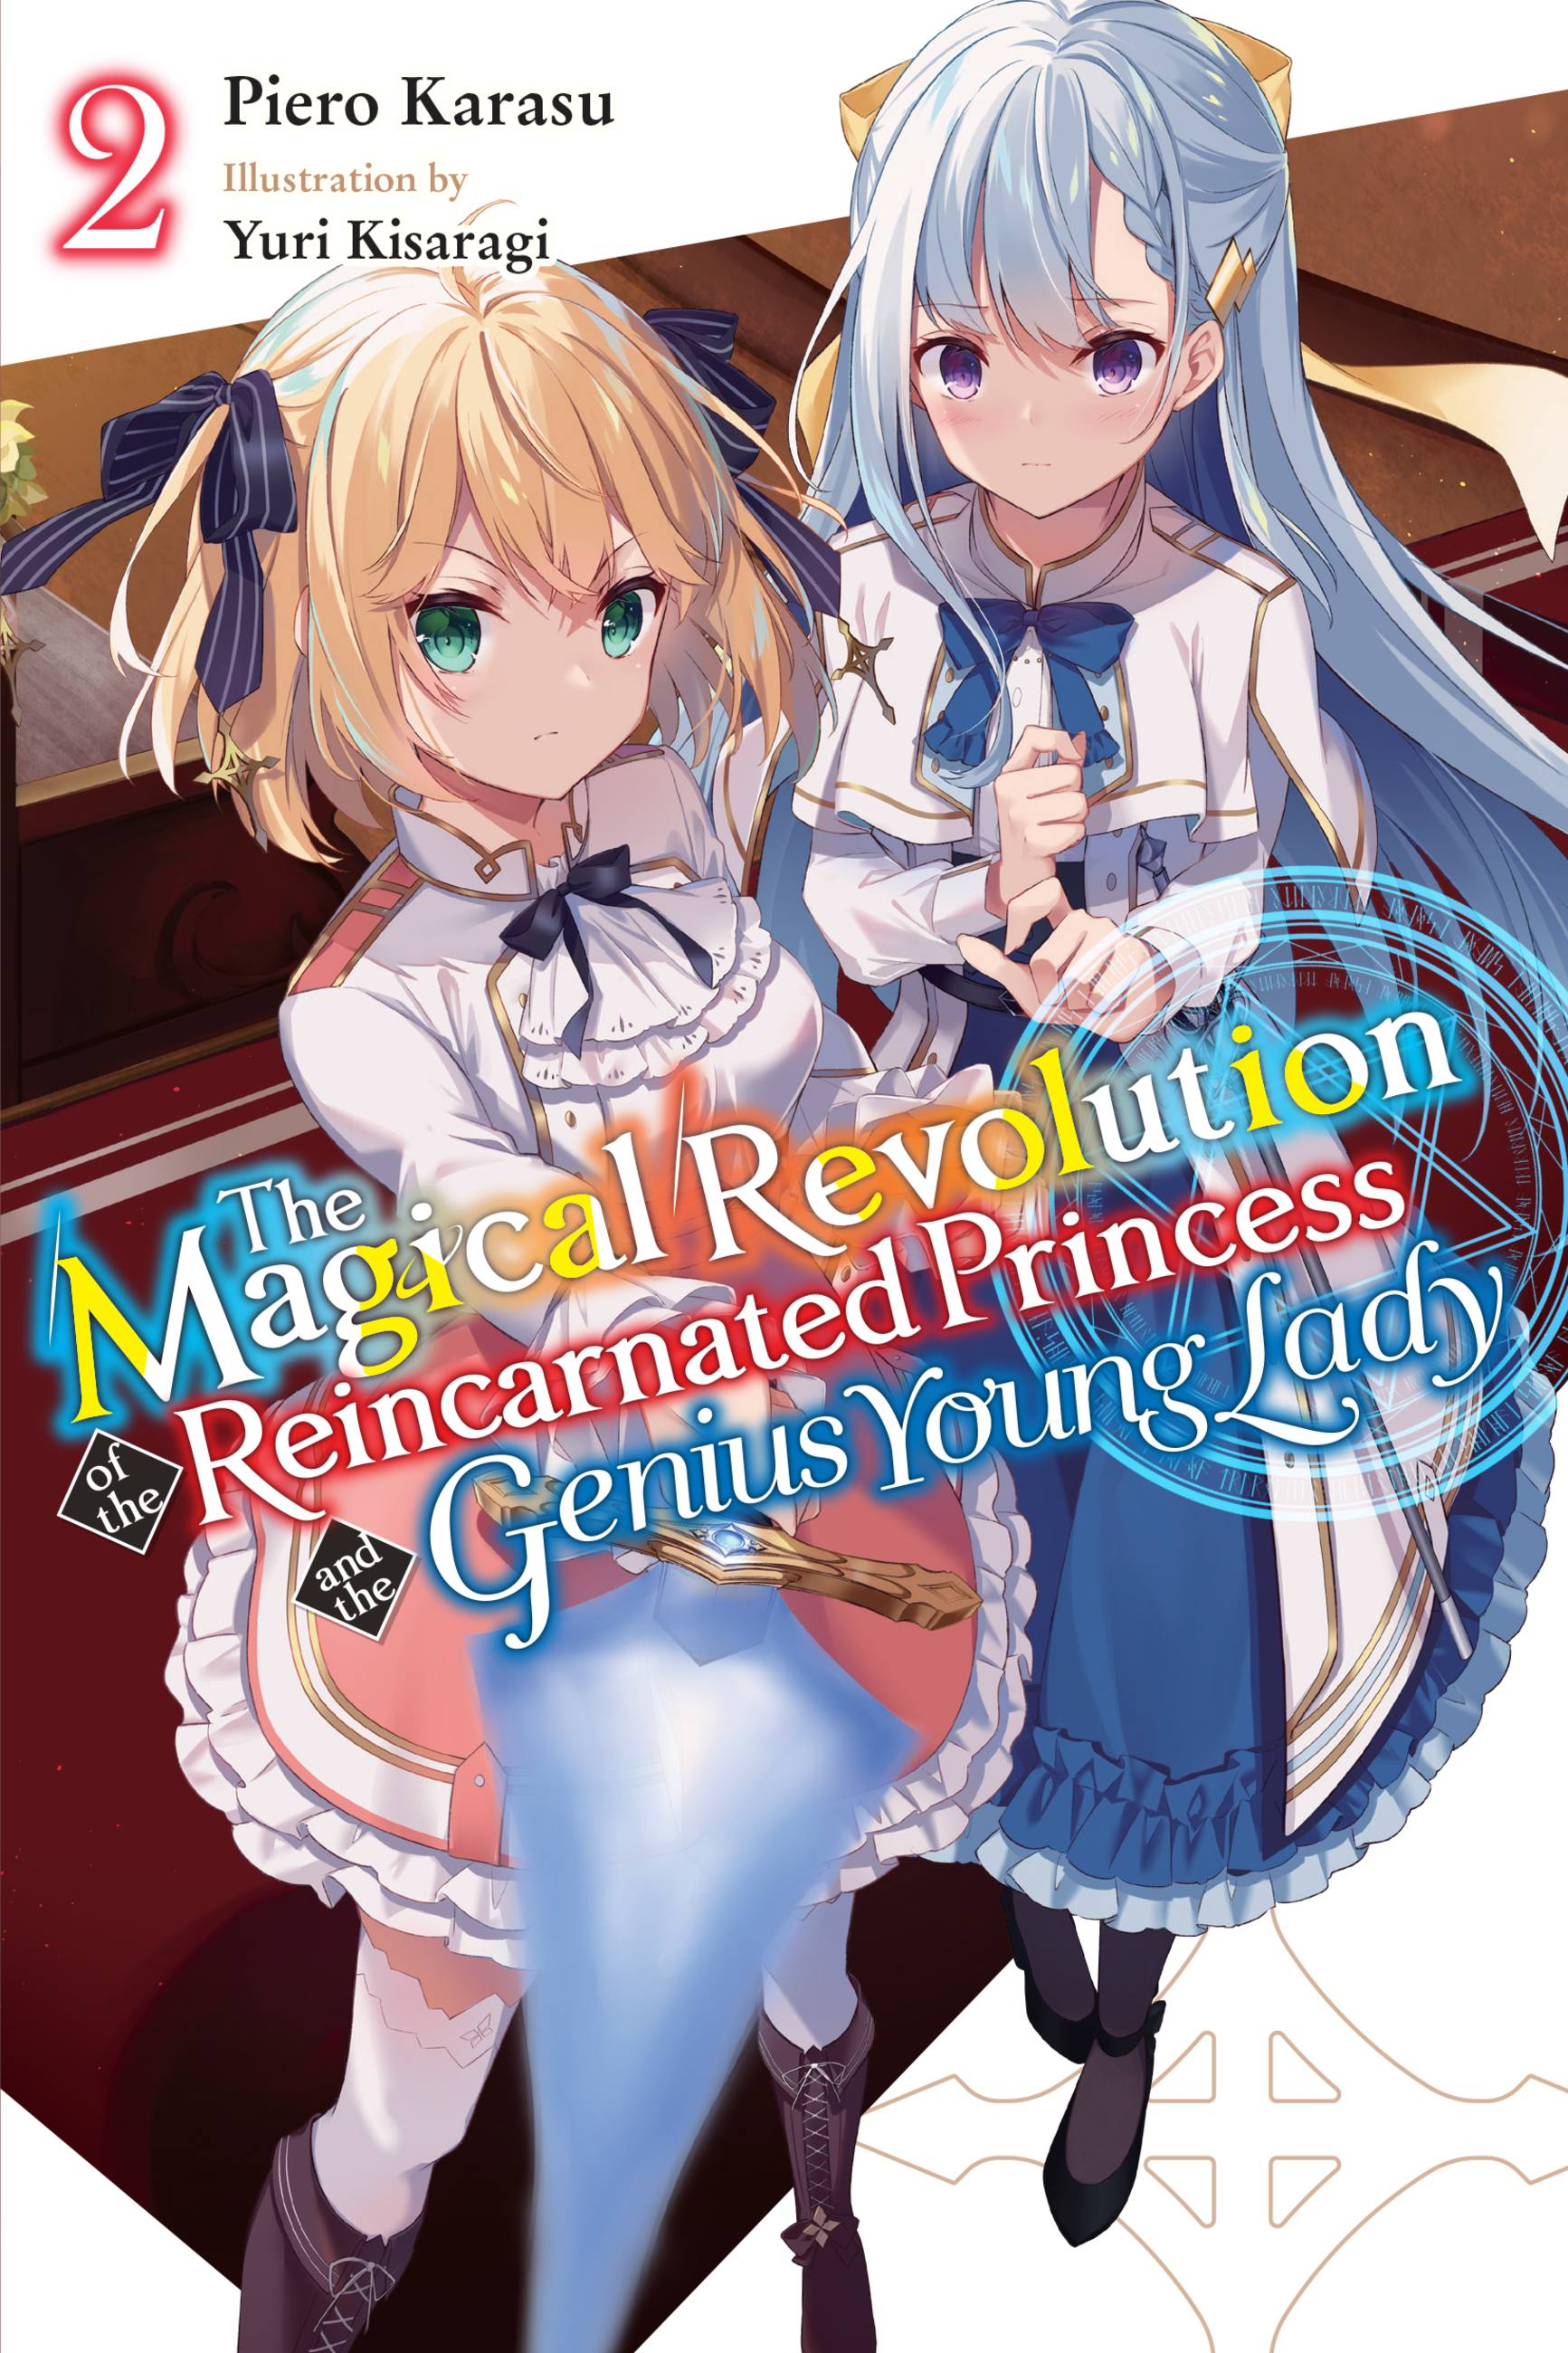 Episode 2, The Magical Revolution of the Reincarnated Princess and the  Genius Young Lady Wiki